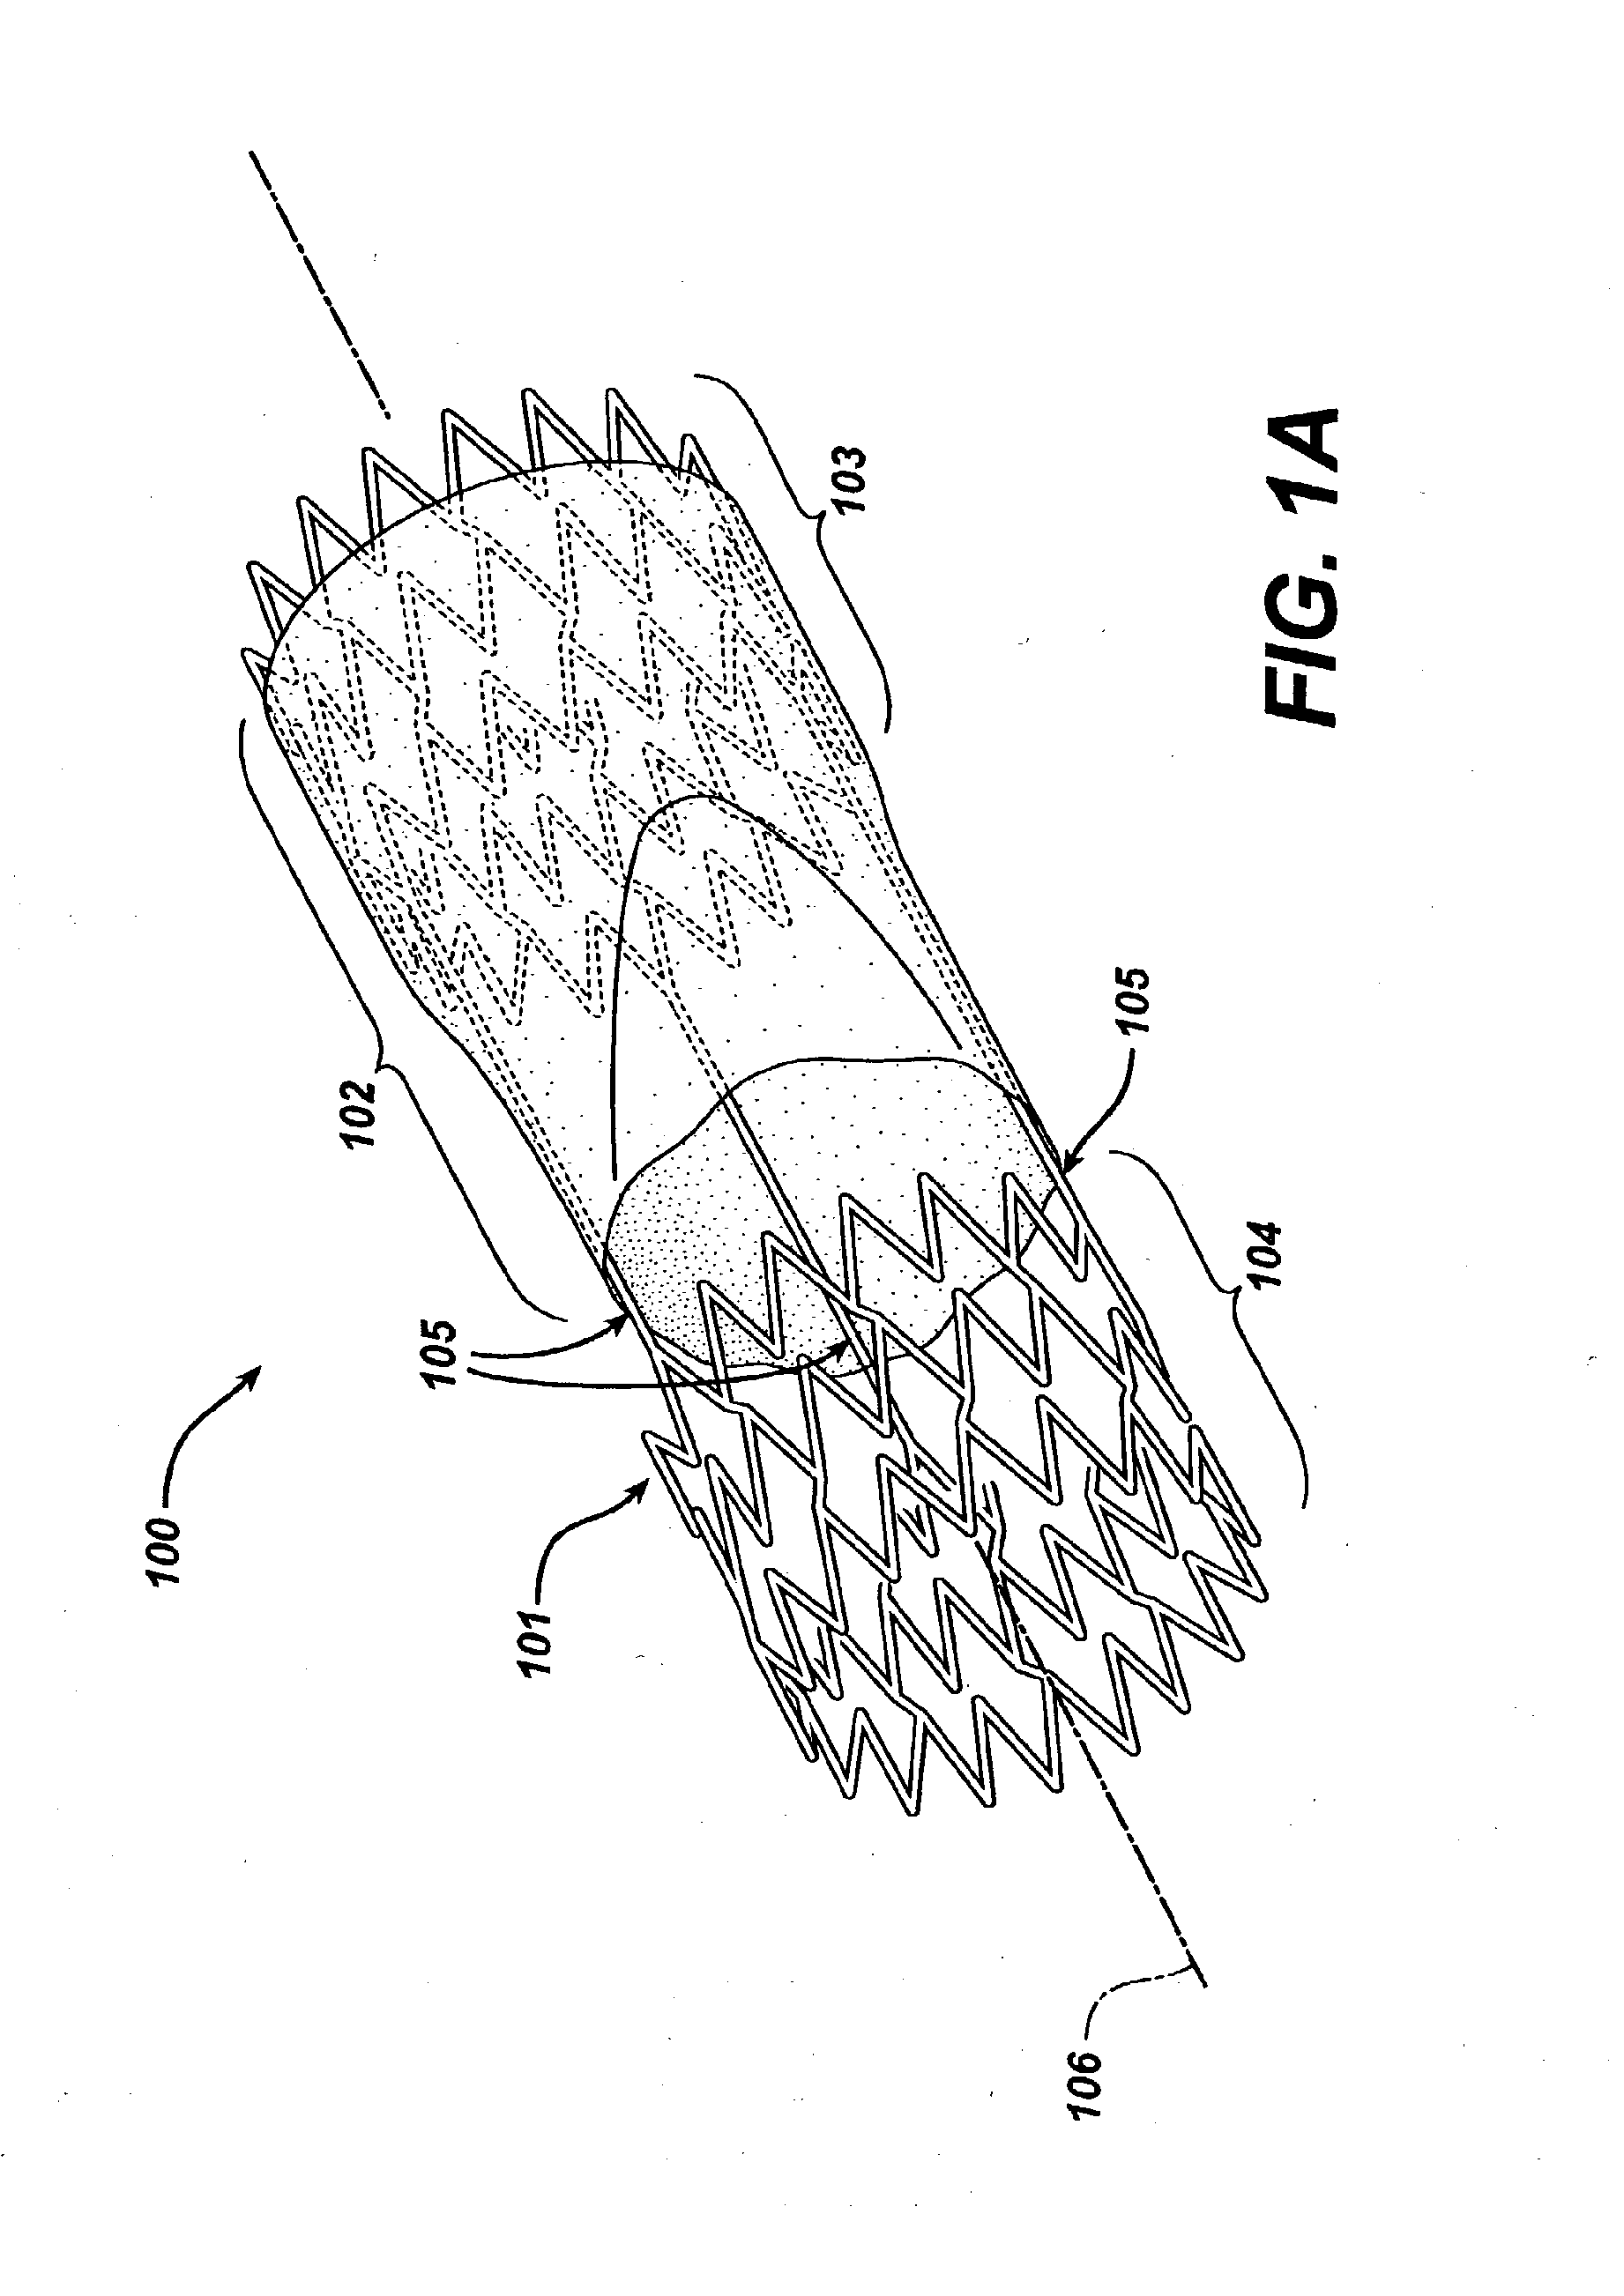 Method of forming a tubular membrane on a structural frame